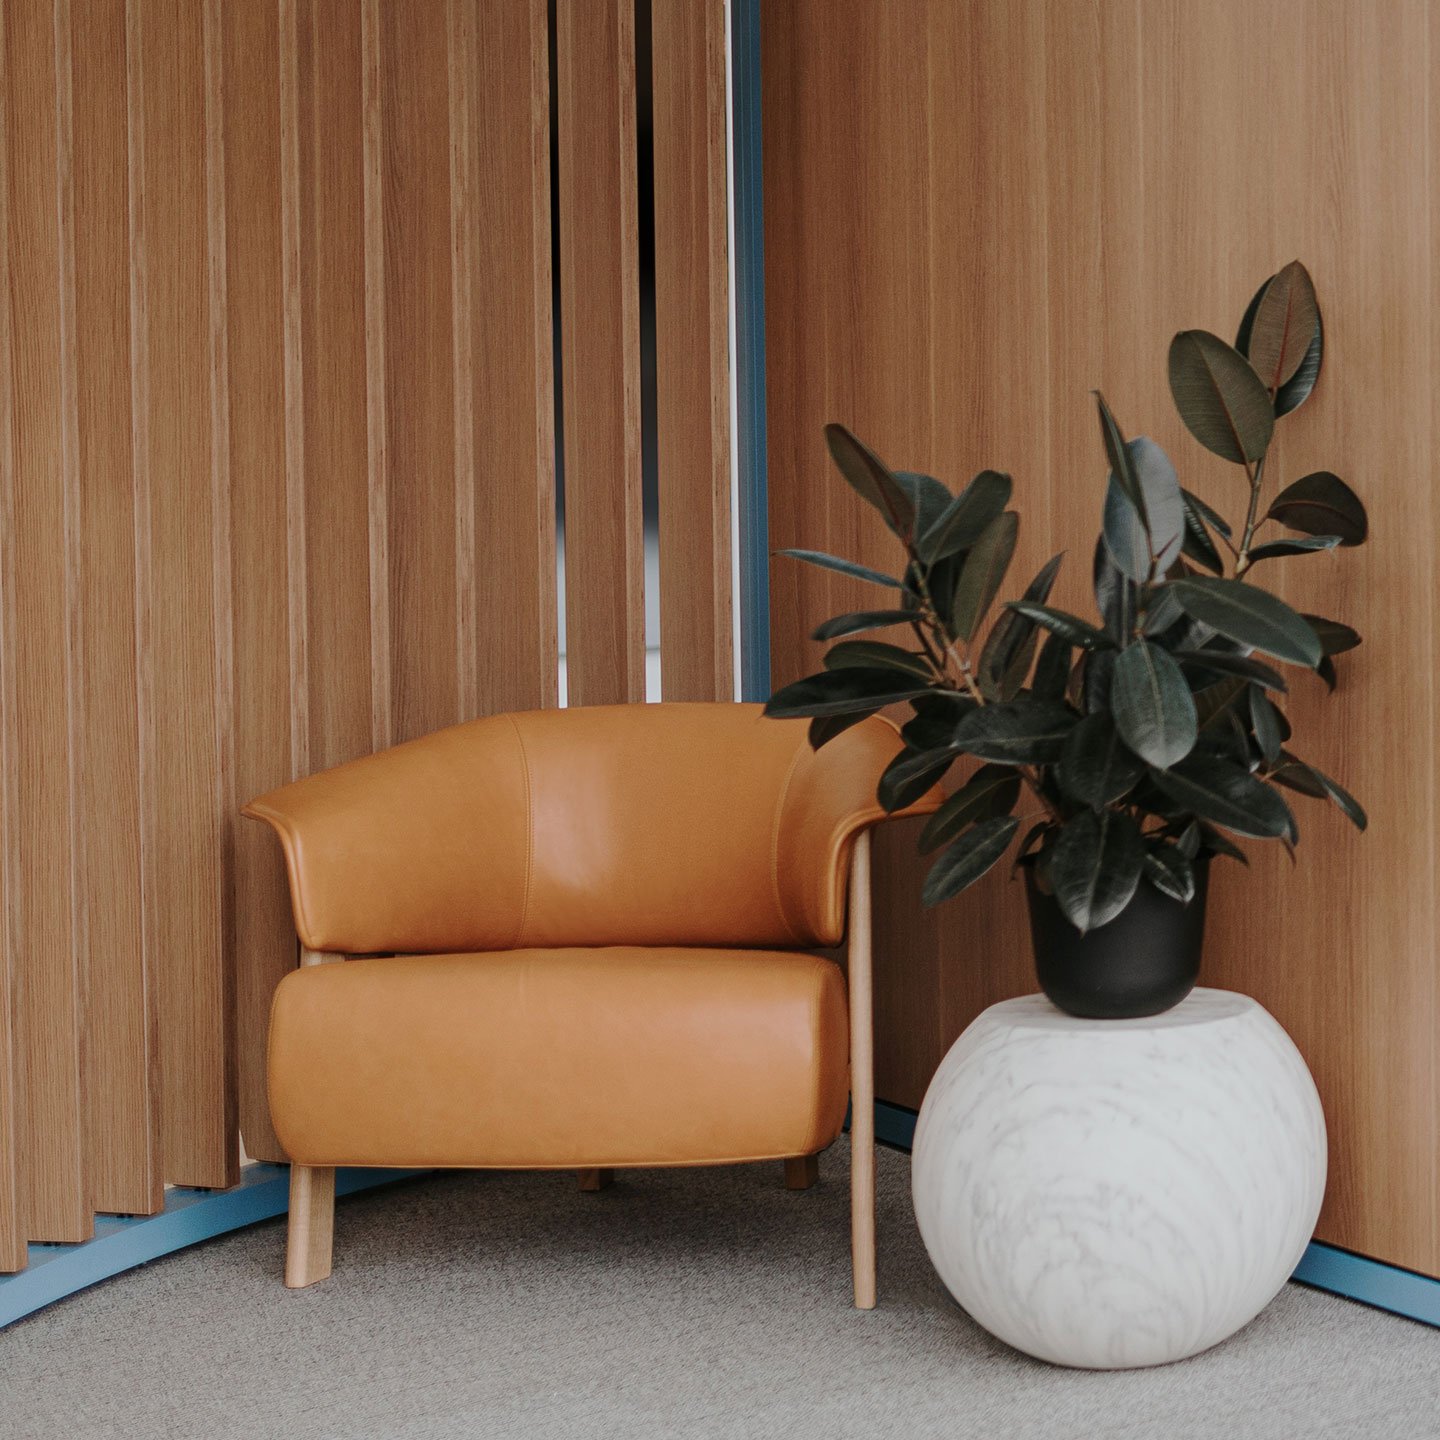 Haworth Back Wing chair in tan leather next to a potted plant